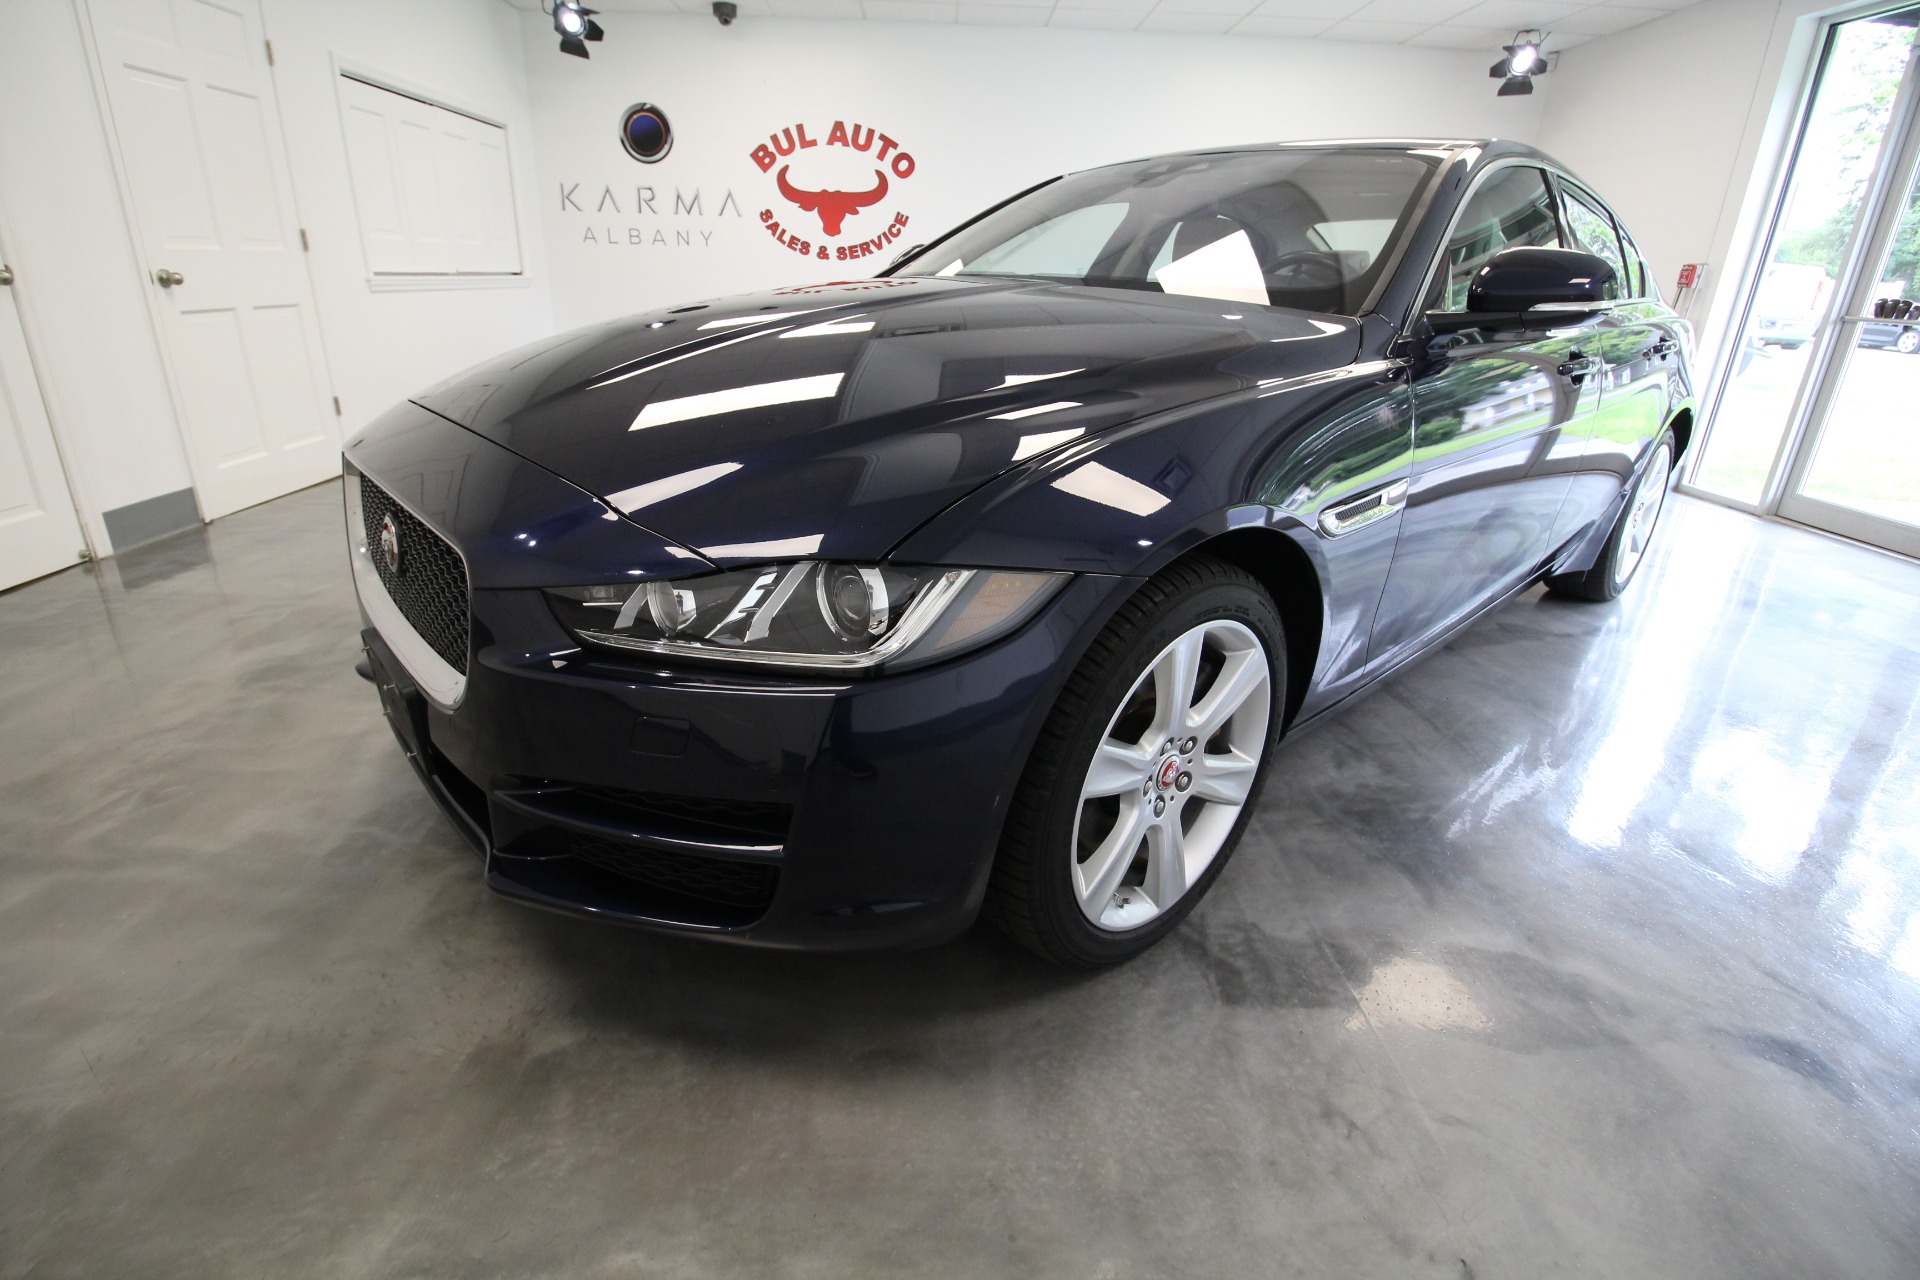 Used 2018 Loire Blue Metallic Jaguar XE 25t Prestige AWD LOW MILES - LOCAL TRADE IN | Albany, NY